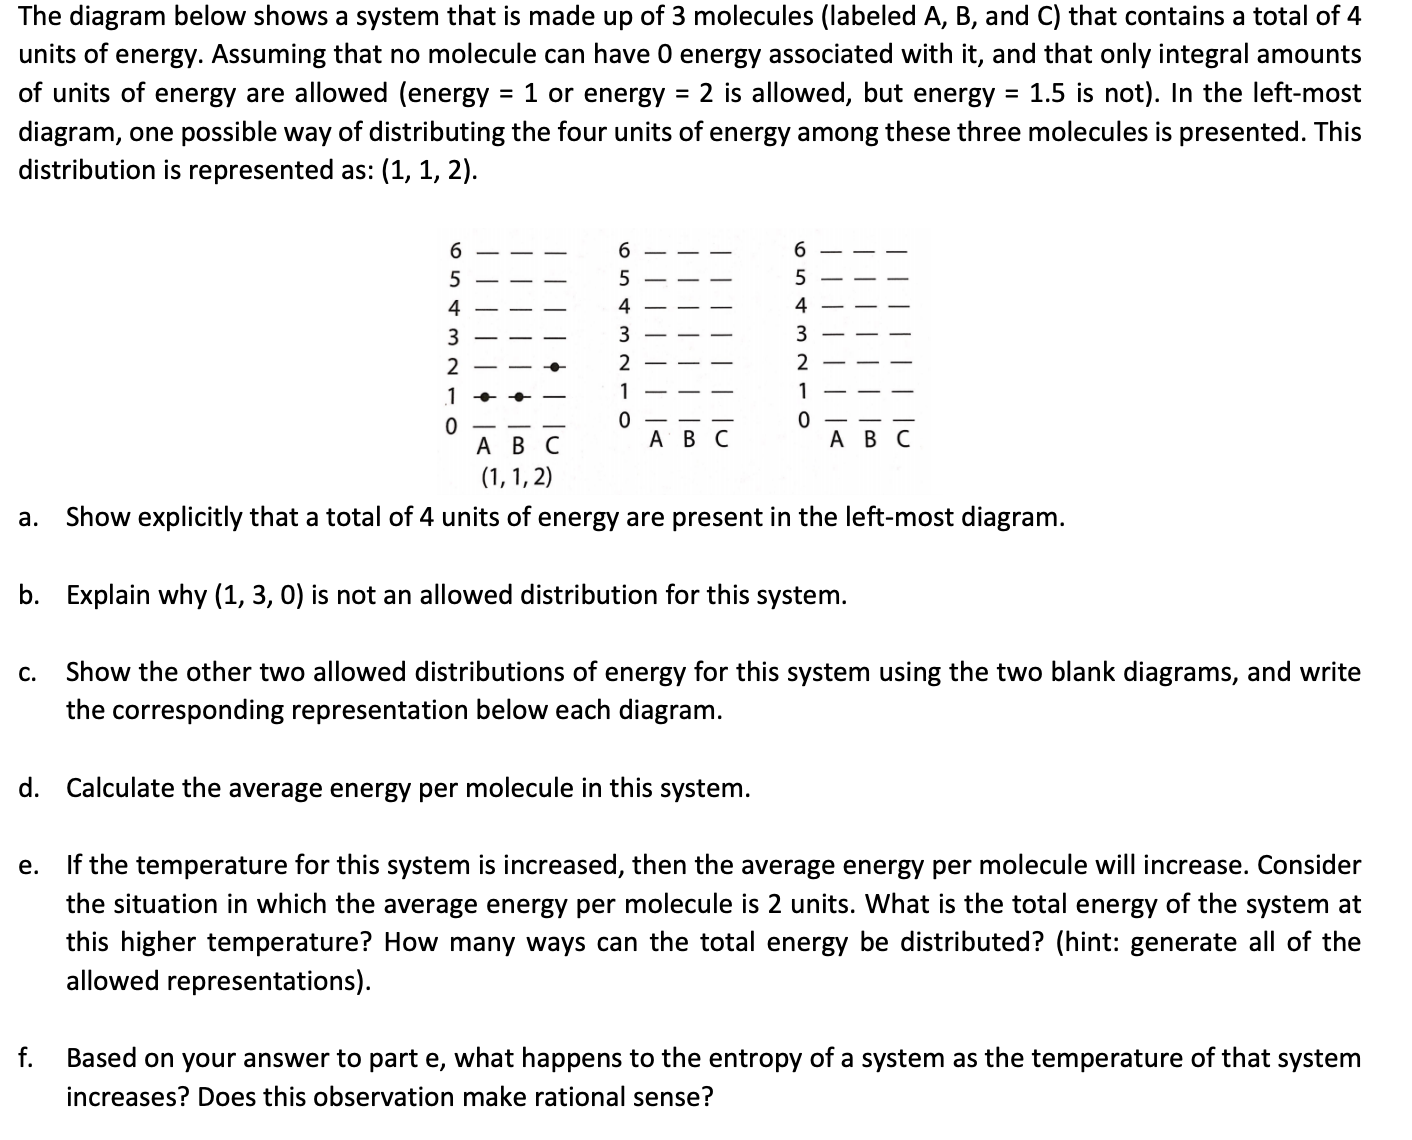 The diagram below shows a system that is made up of 3 molecules (labeled A, B, and C) that contains a total of 4
units of energy. Assuming that no molecule can have 0 energy associated with it, and that only integral amounts
of units of energy are allowed (energy = 1 or energy = 2 is allowed, but energy = 1.5 is not). In the left-most
diagram, one possible way of distributing the four units of energy among these three molecules is presented. This
distribution is represented as: (1, 1, 2).
%3D
6
SEE
6
5
4
4
4
3
3
3
2
2
1
1
1
A B C
AB C
АВС
(1, 1, 2)
a. Show explicitly that a total of 4 units of energy are present in the left-most diagram.
b. Explain why (1, 3, 0) is not an allowed distribution for this system.
Show the other two allowed distributions of energy for this system using the two blank diagrams, and write
the corresponding representation below each diagram.
С.
